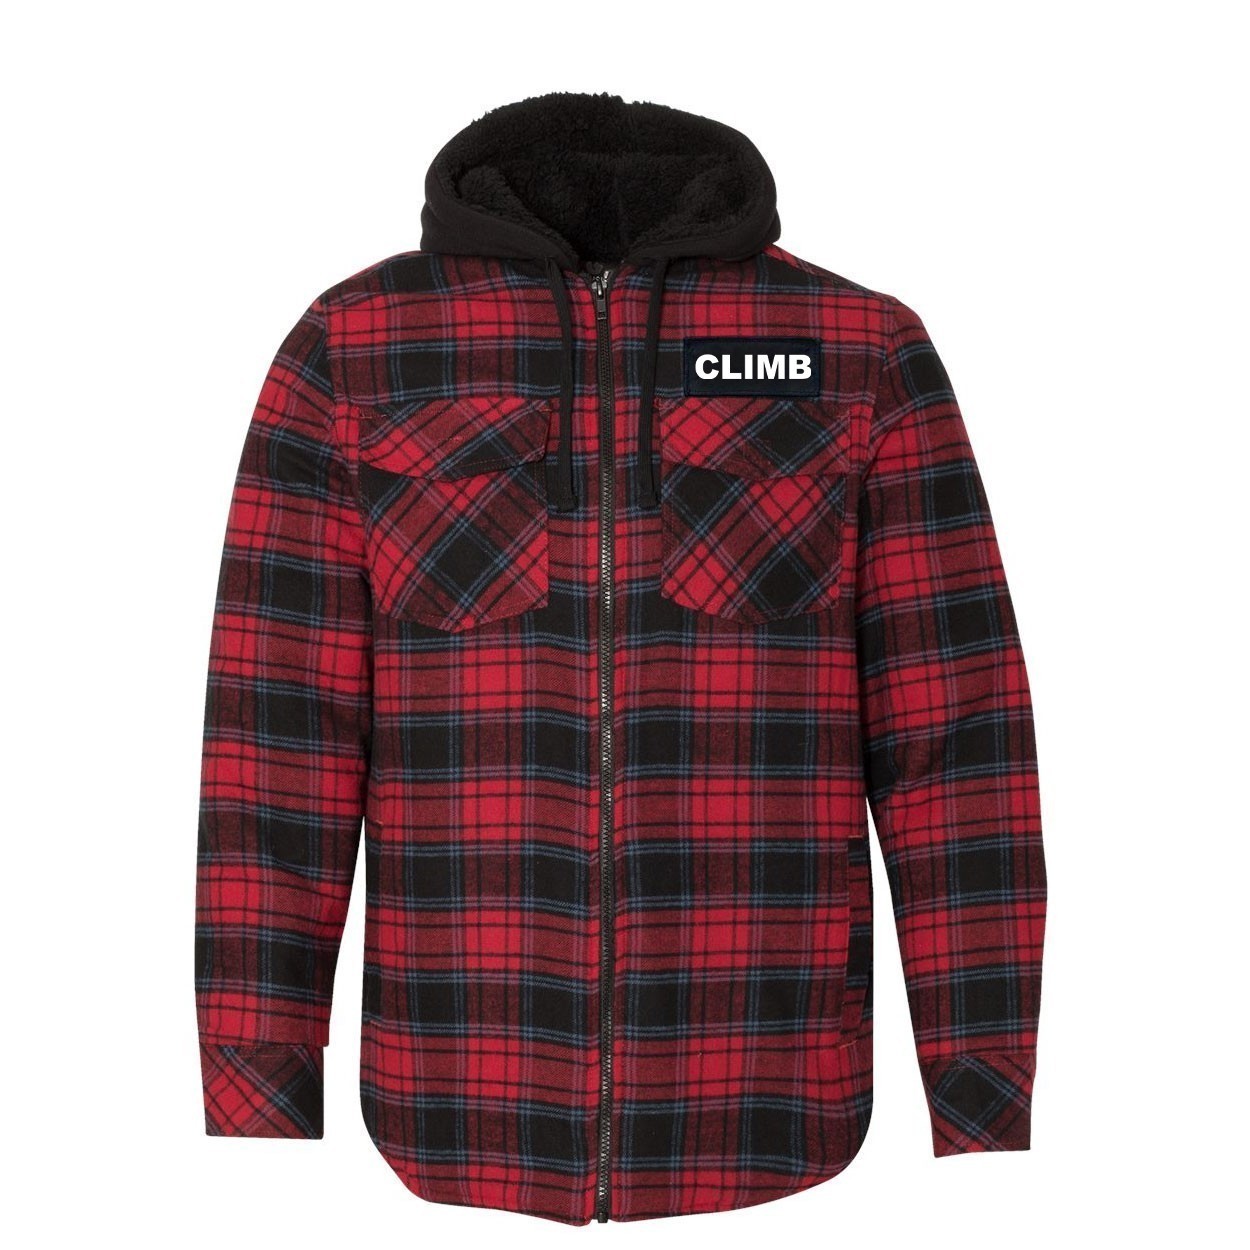 Climb Brand Logo Classic Unisex Full Zip Woven Patch Hooded Flannel Jacket Red/Black Buffalo (White Logo)